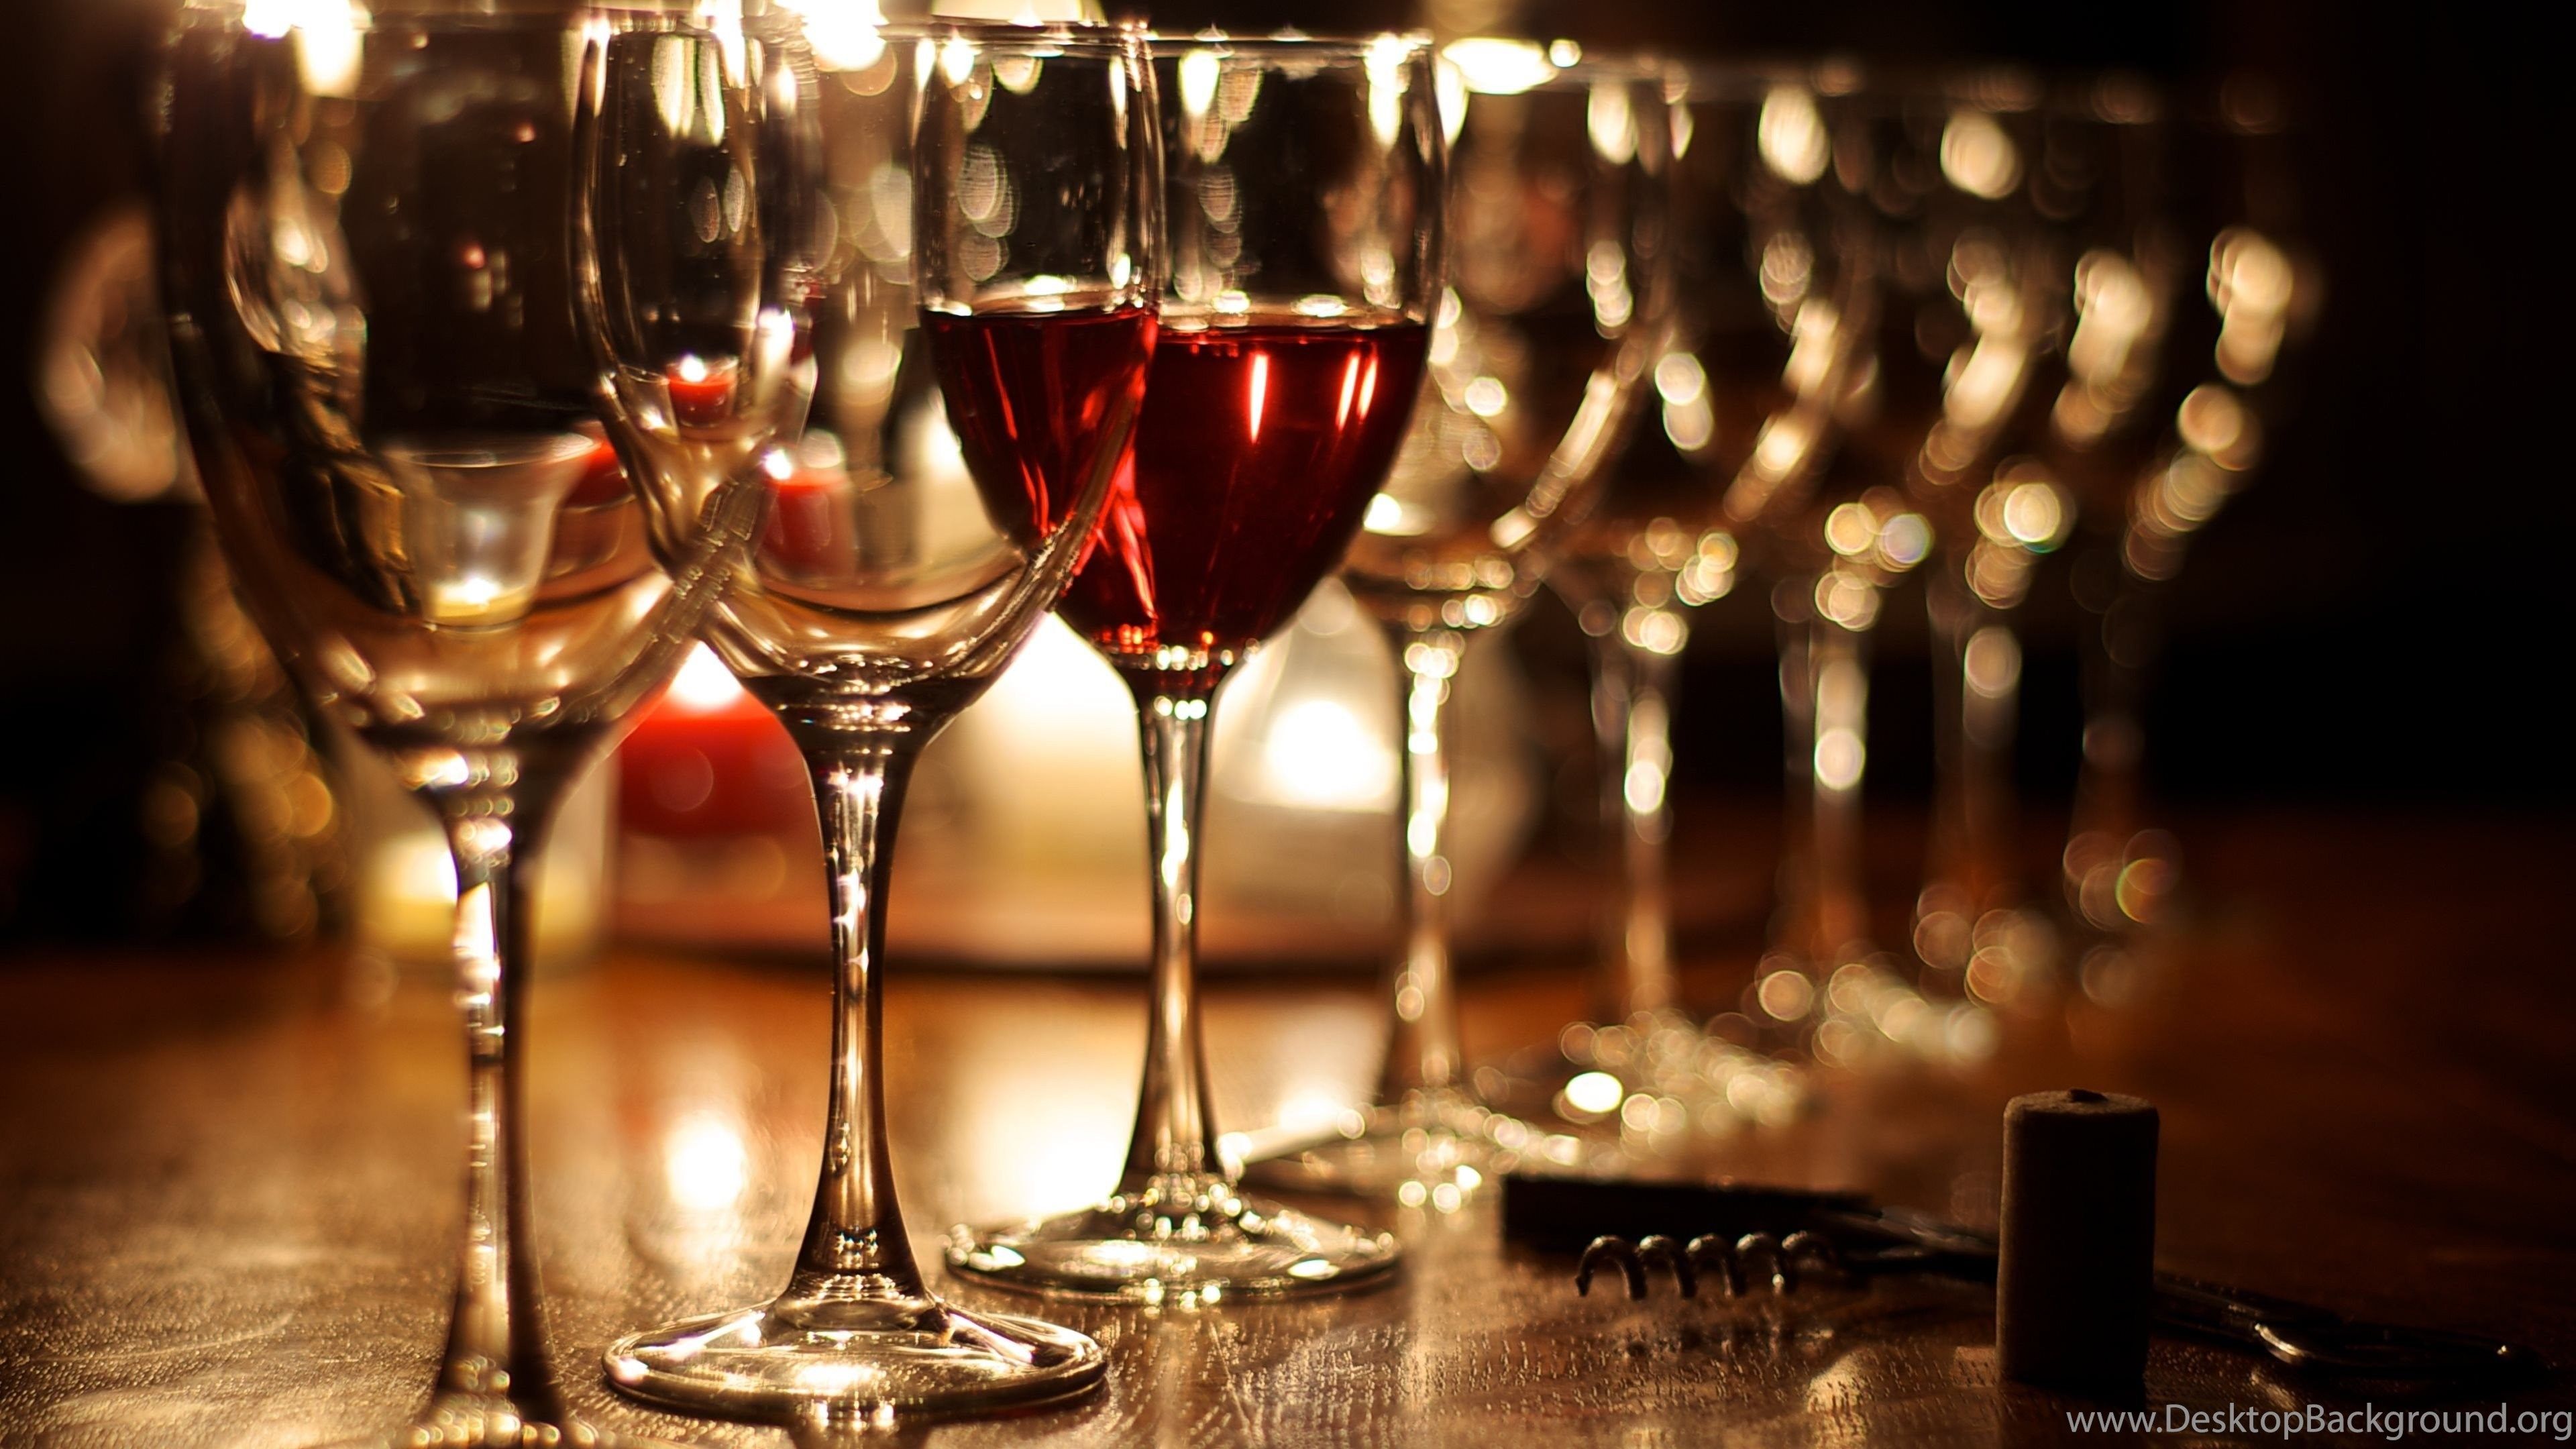 Full HD Wallpaper Photo Picture Image Of Wine Glasses At Bar Table. Desktop Background